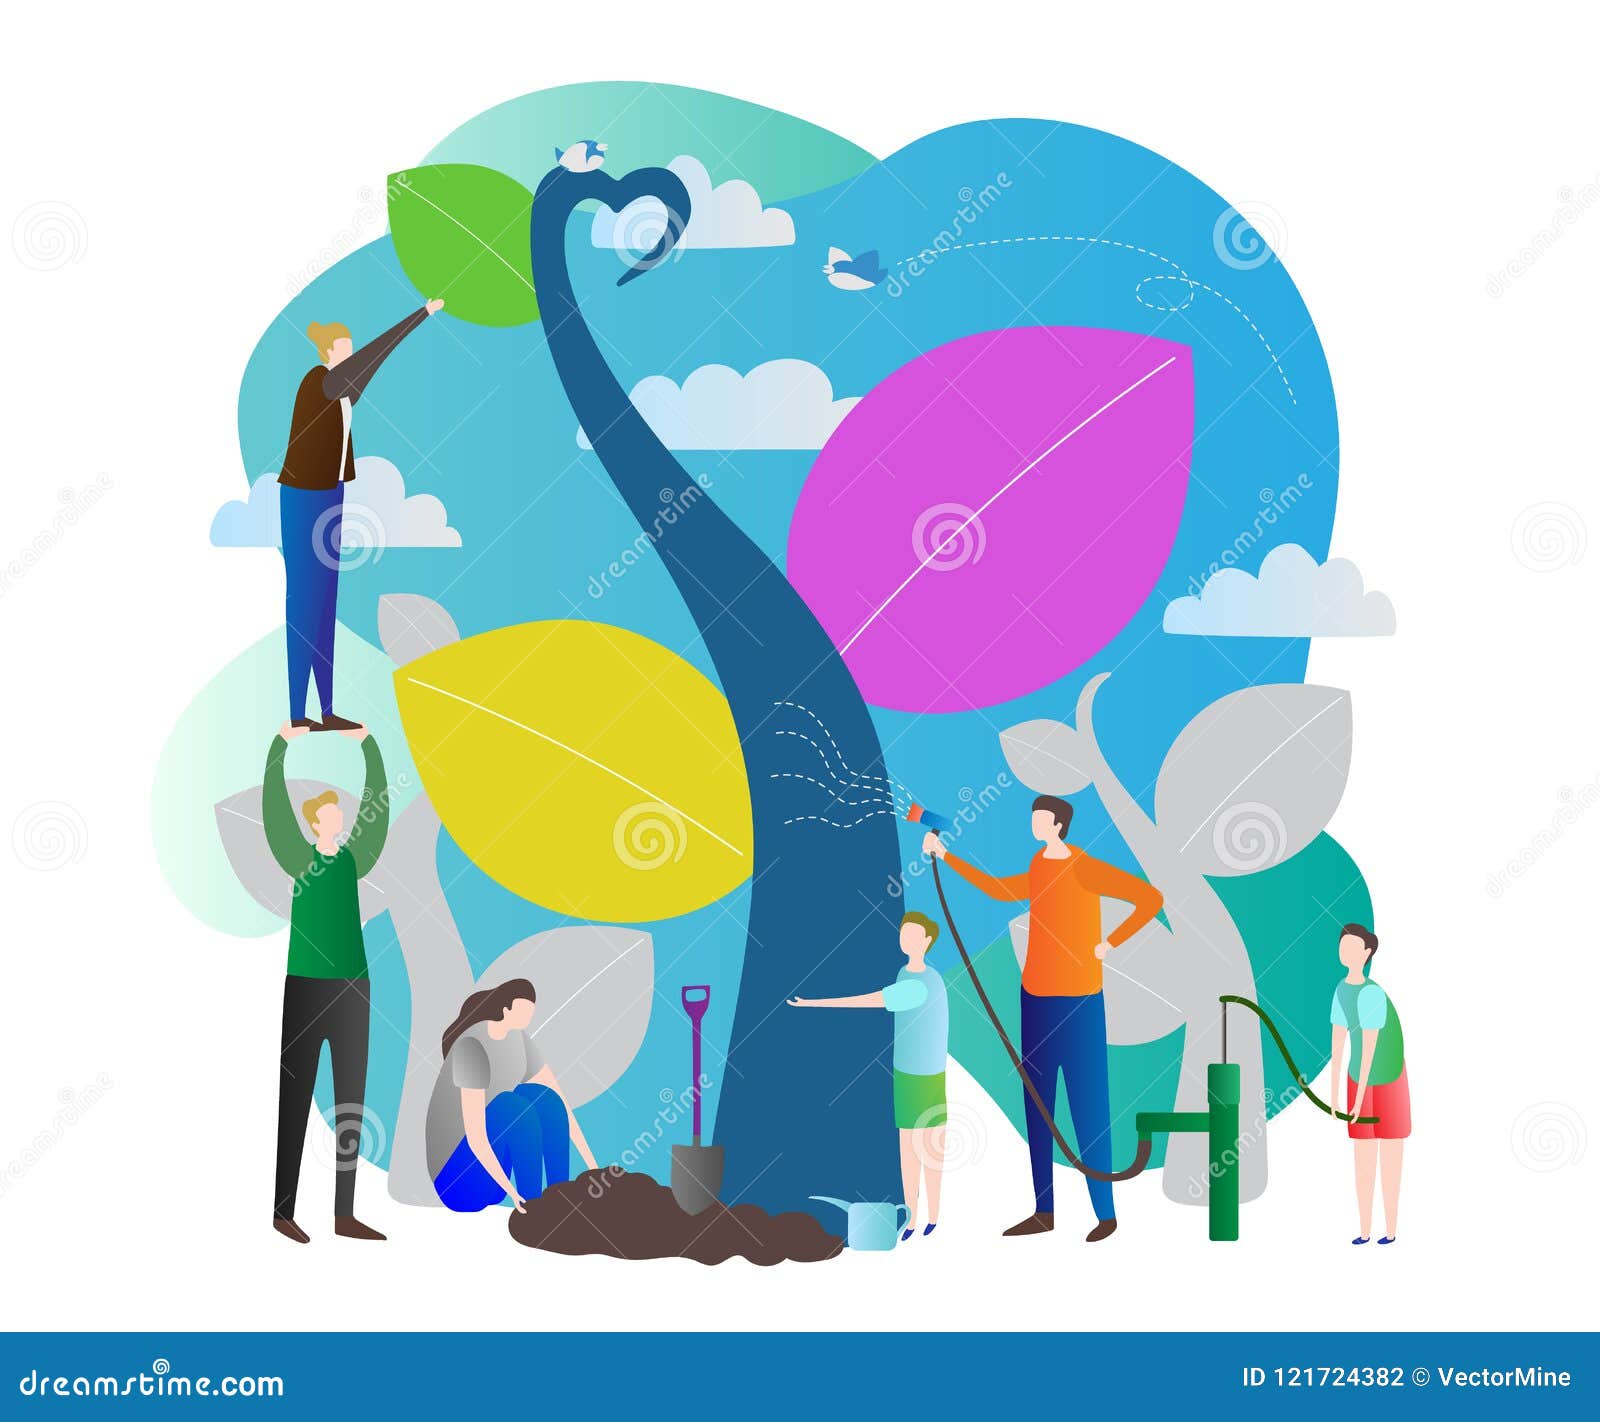 Sapling Vector Illustration with Nurturing Nature, World Ecology Care